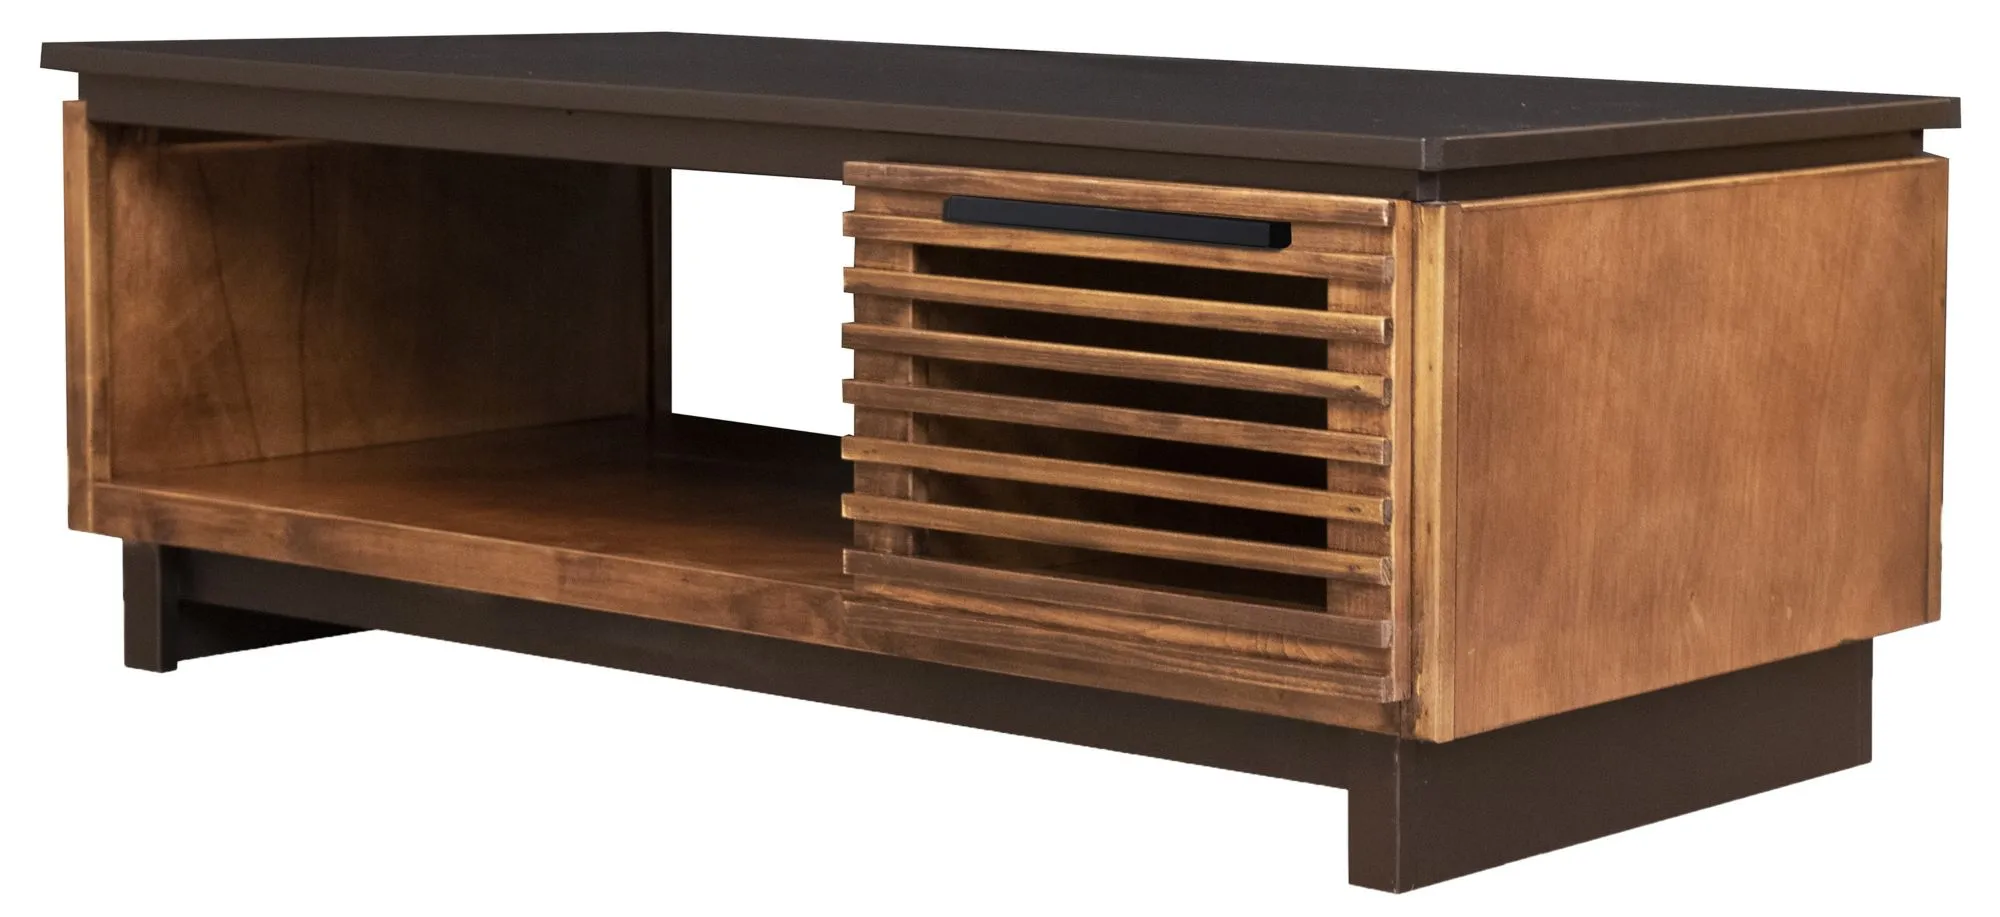 Reah Cocktail Table in Bourbon and Black by Legends Furniture